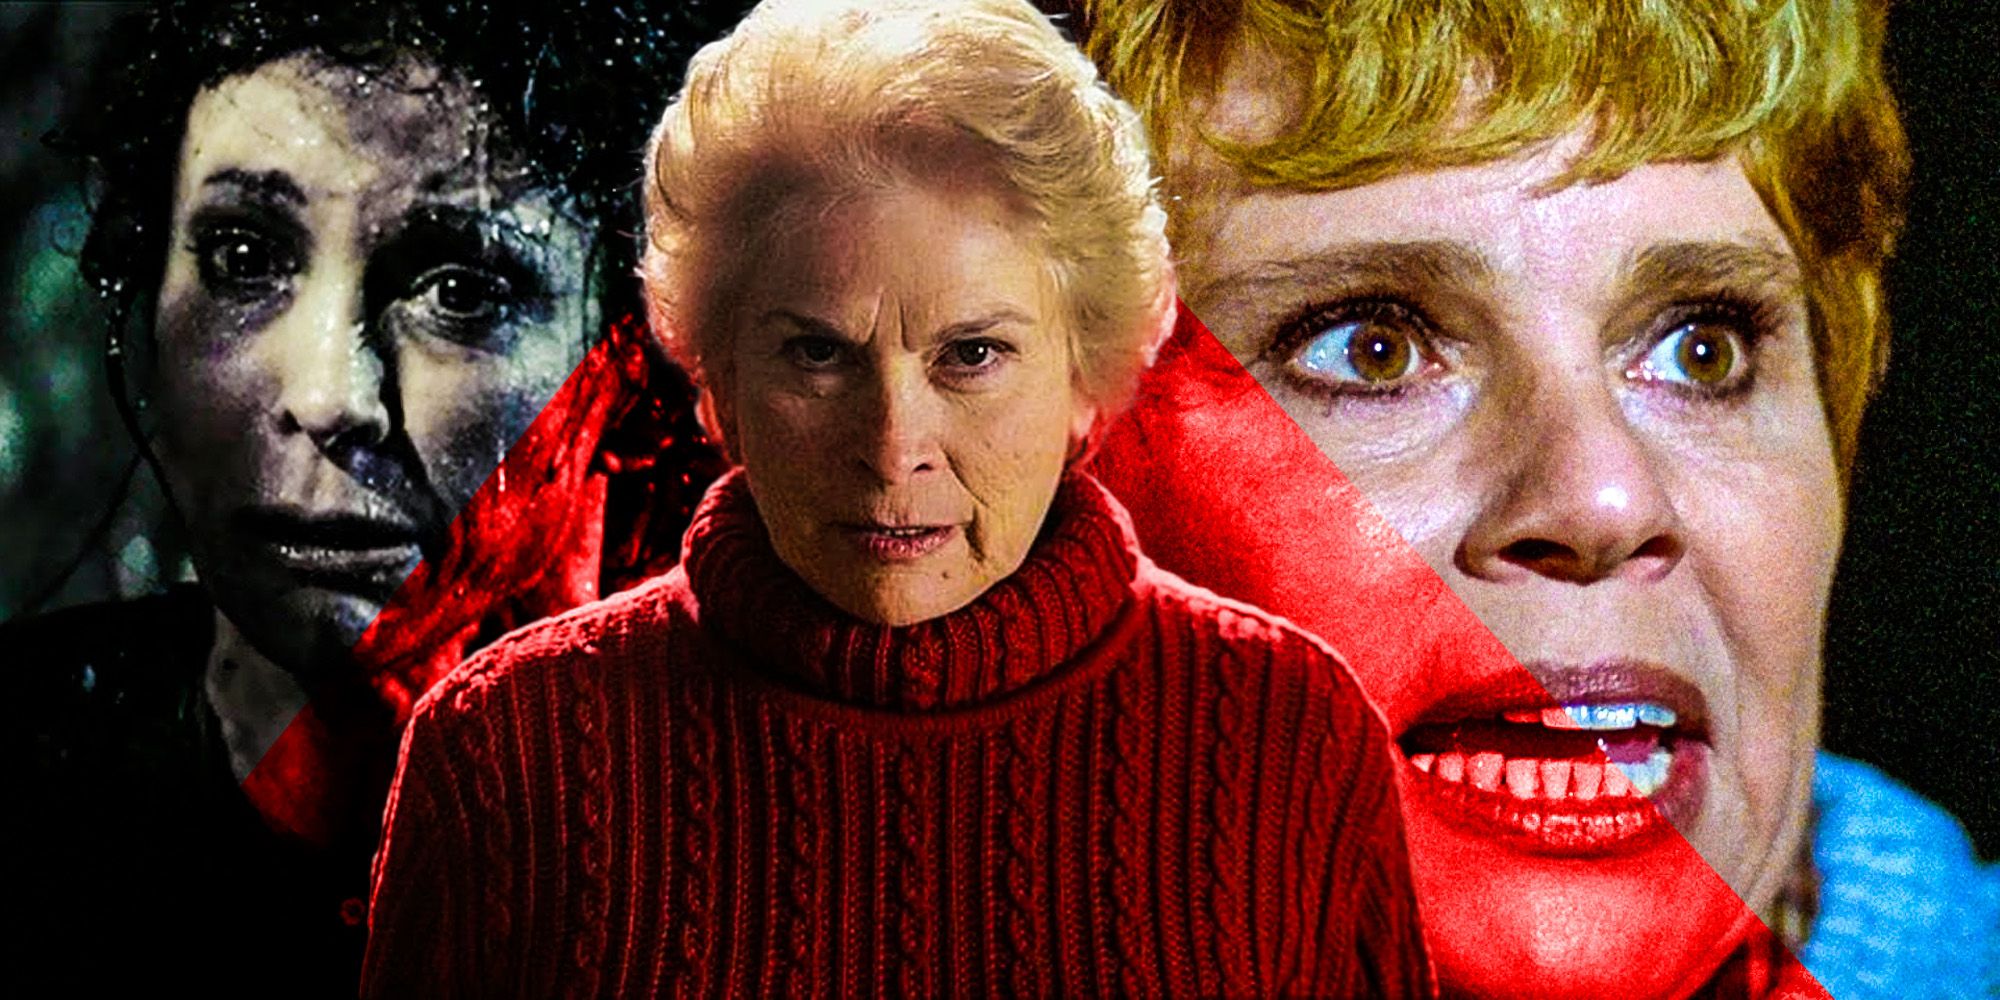 Pamela Voorhees appearance in the friday the 13th series